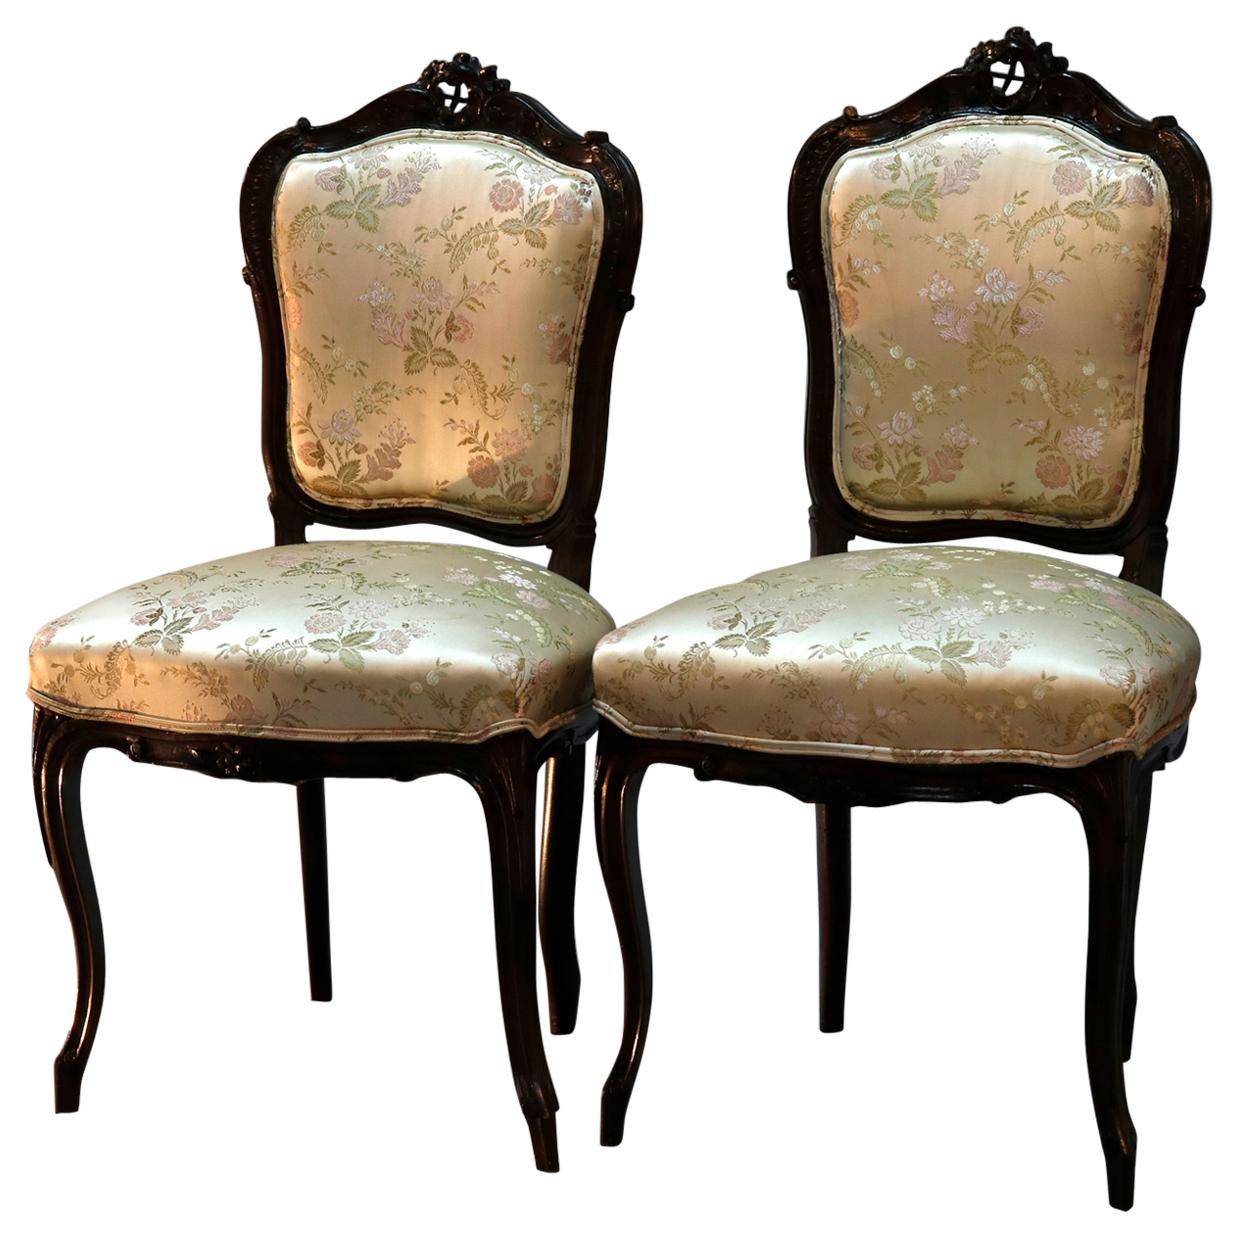 Pair of French Louis XV Style Carved Walnut Parlor Side Chairs, circa 1890